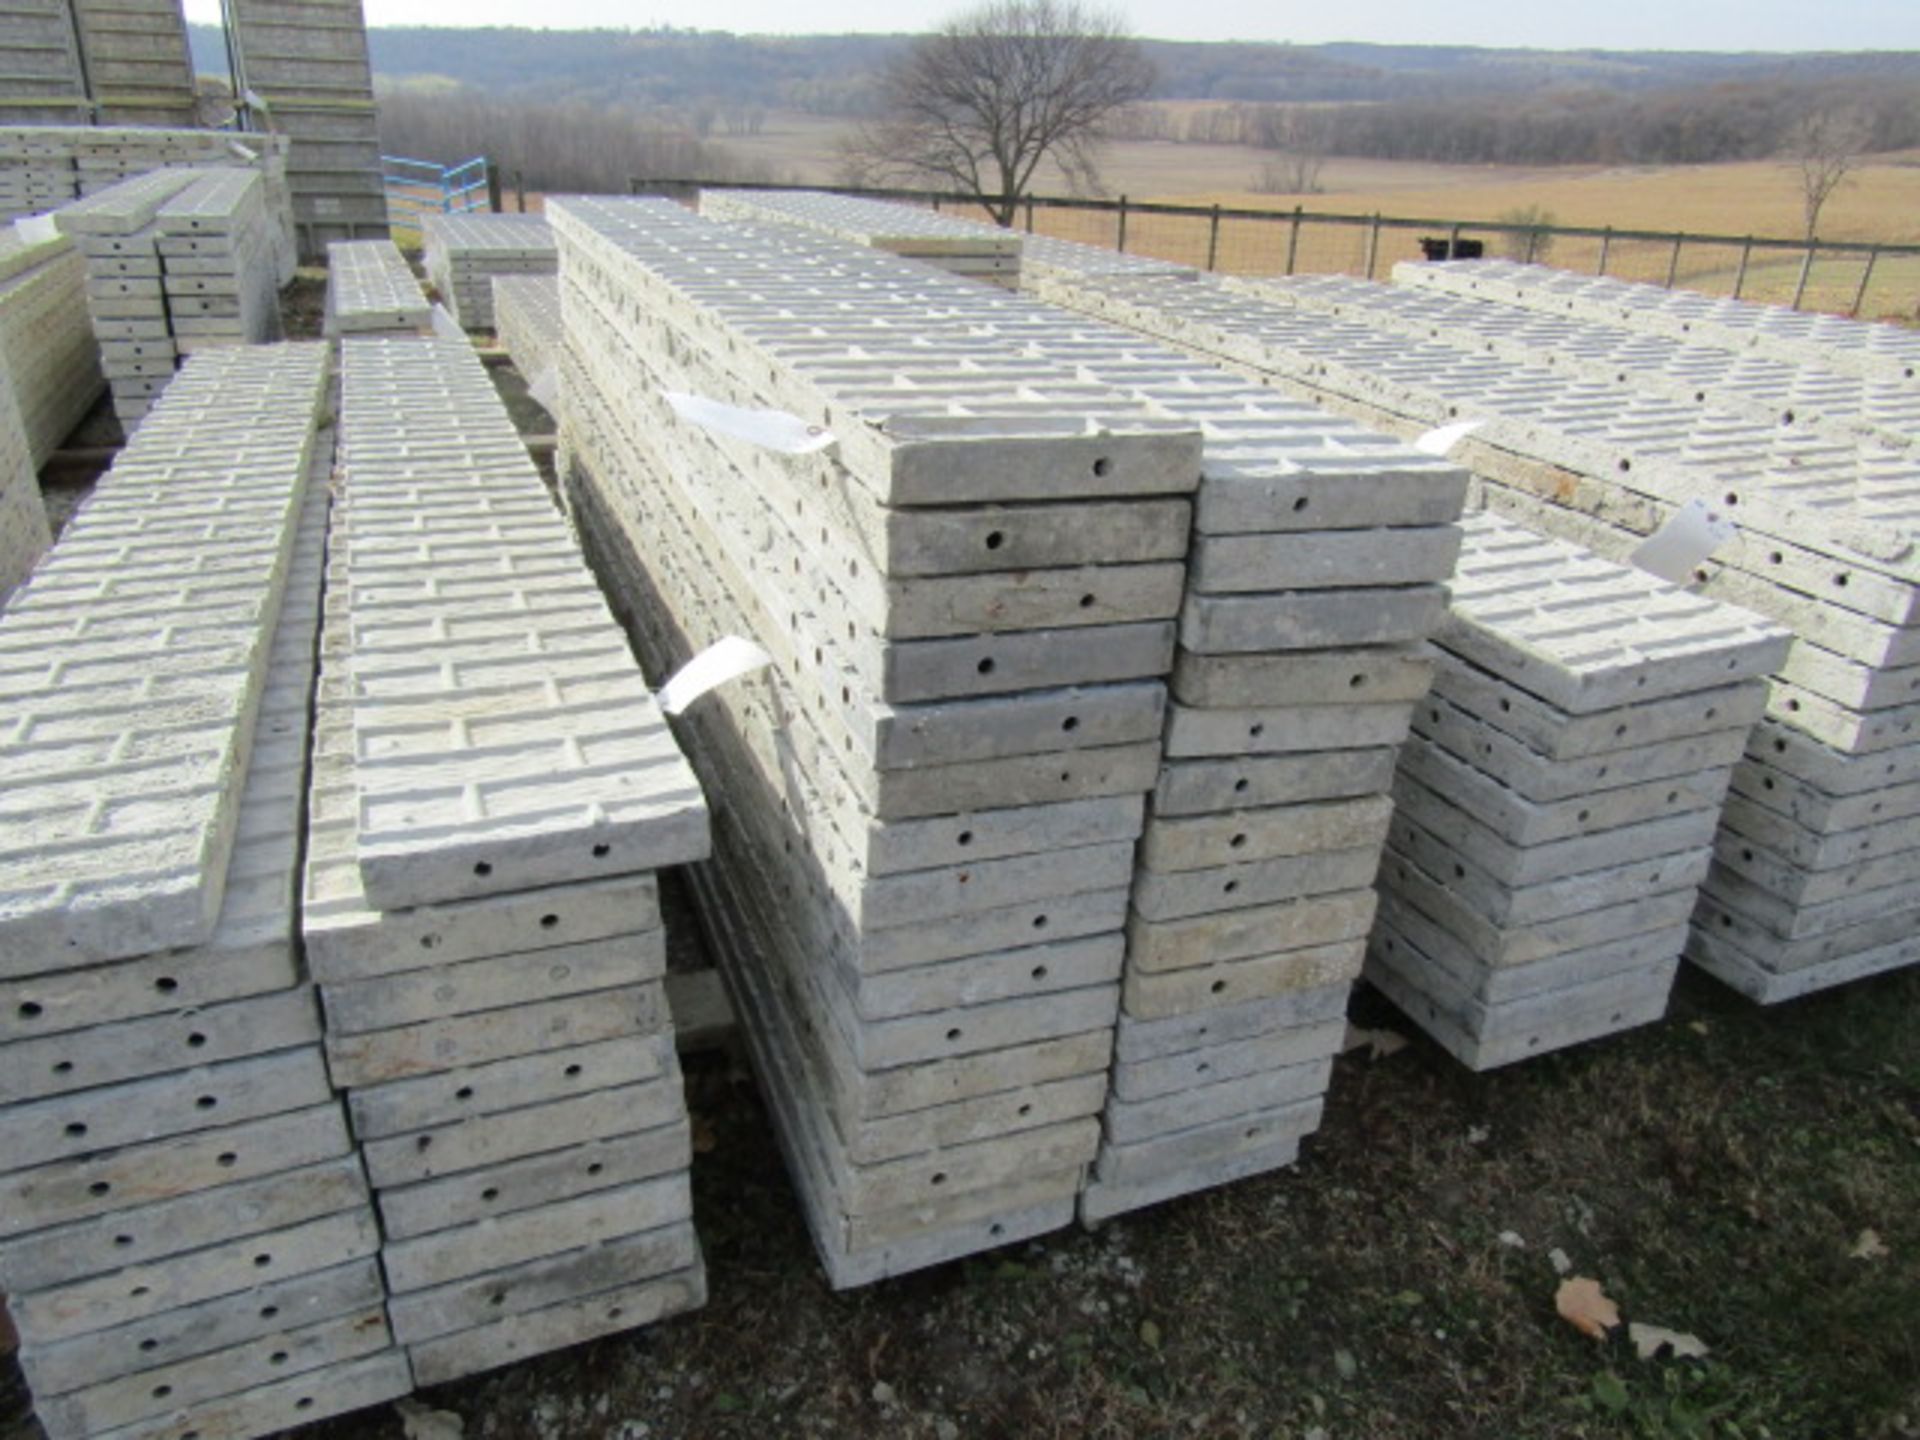 (16) 12" x 9' Corners Precise Concrete Forms, Textured Brick 8" Hole Pattern, Located in